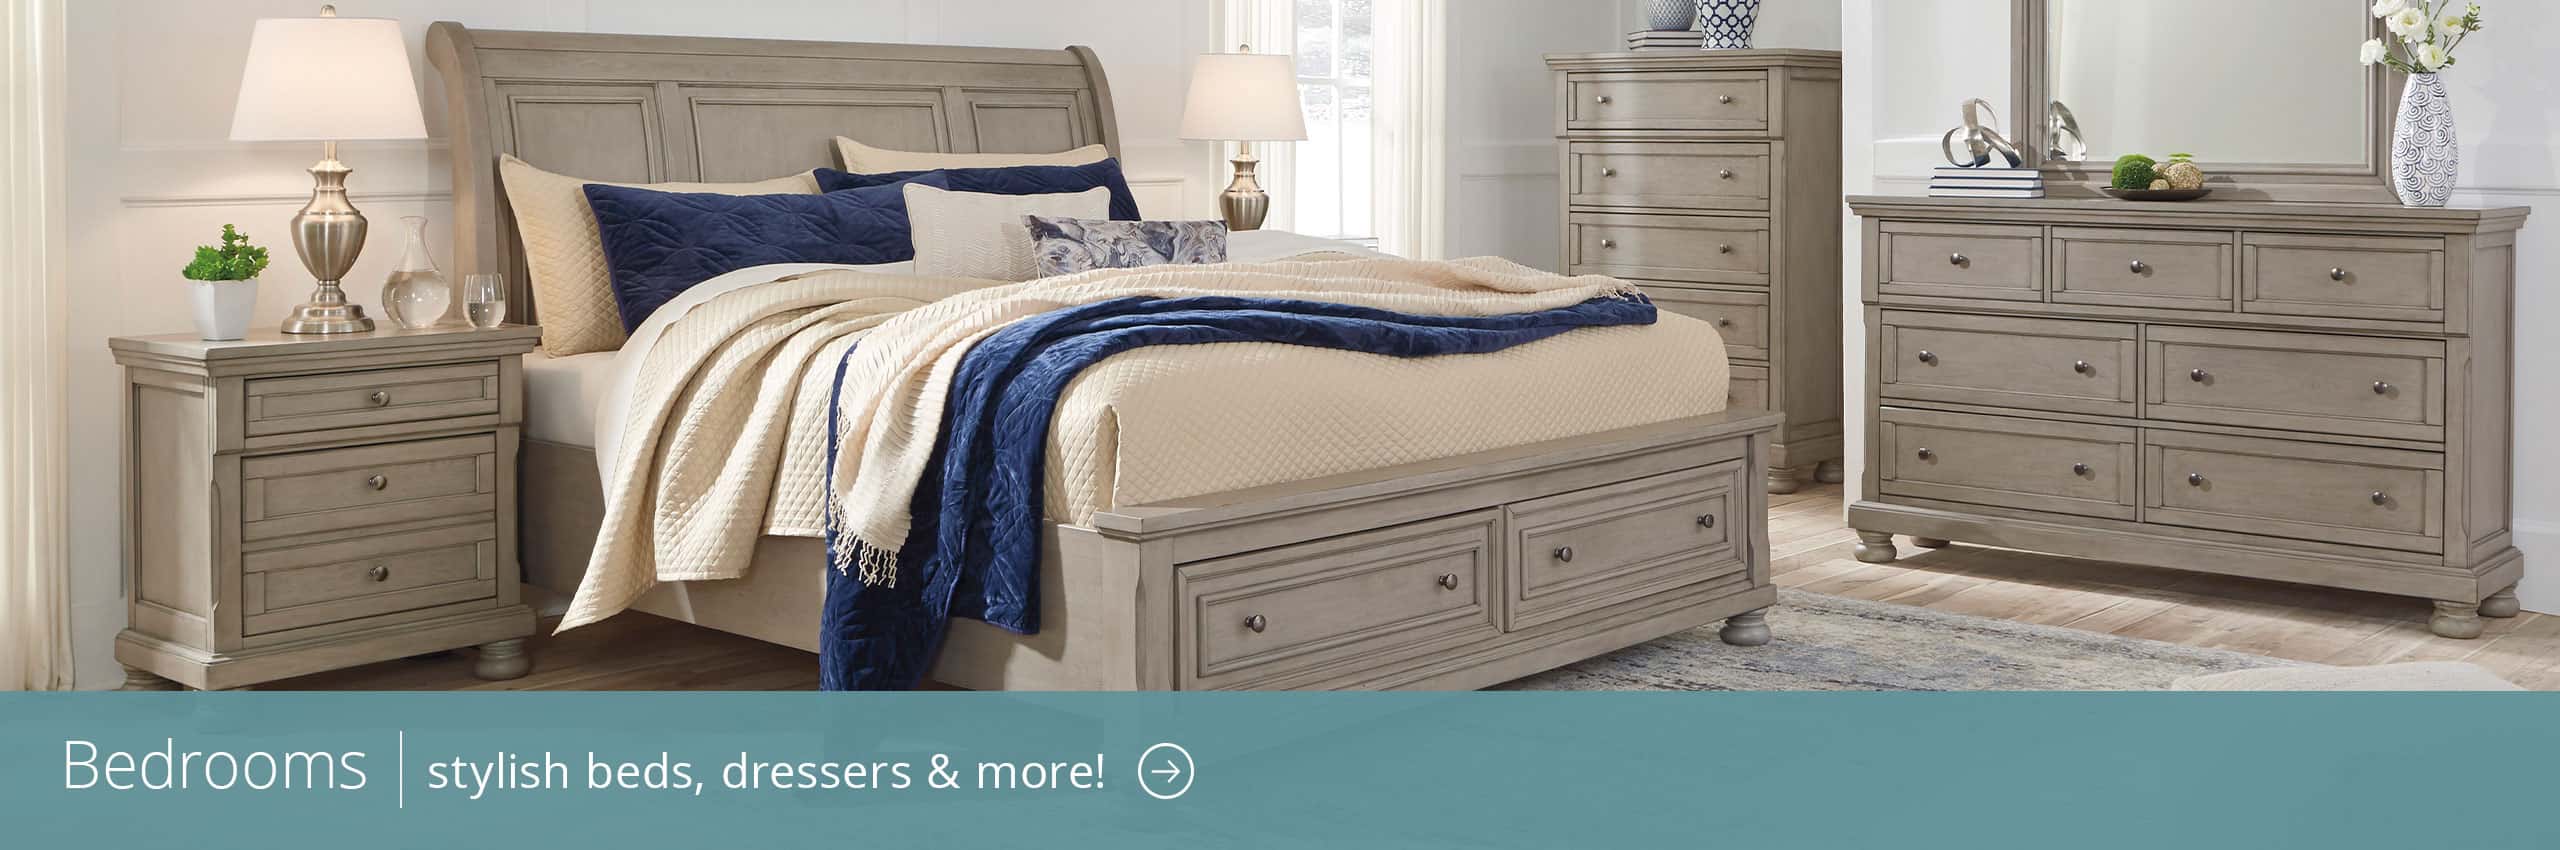 Bedrooms | Stylish beds, dressers & more >